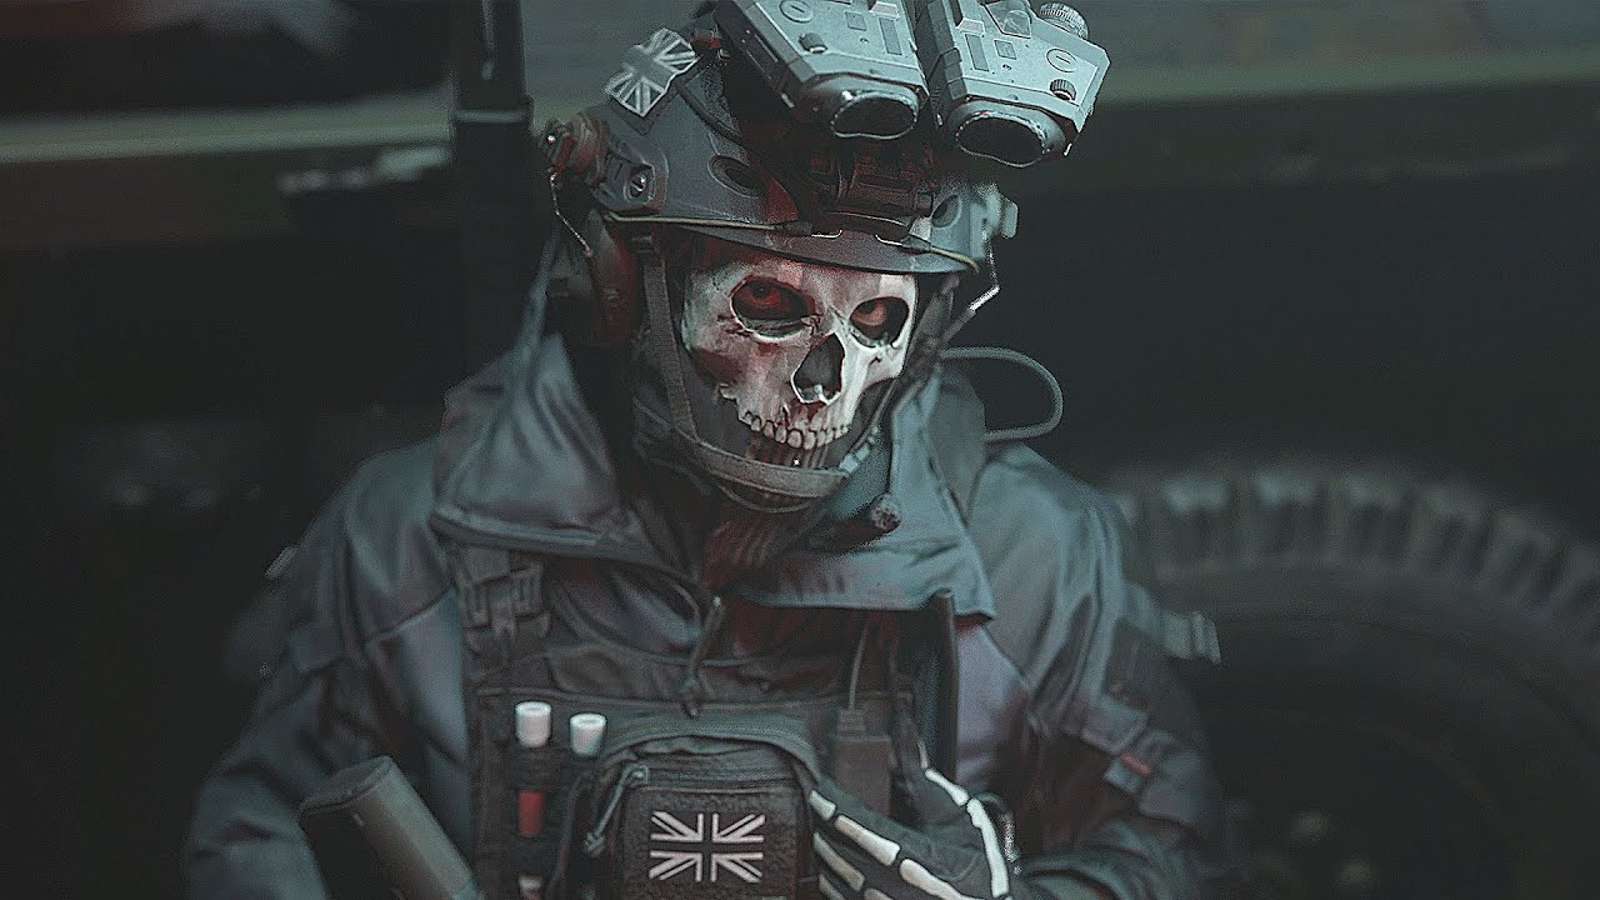 Simon 'Ghost' Riley is the standout character from the MW2 campaign and Infinity Ward may give him a spinoff.